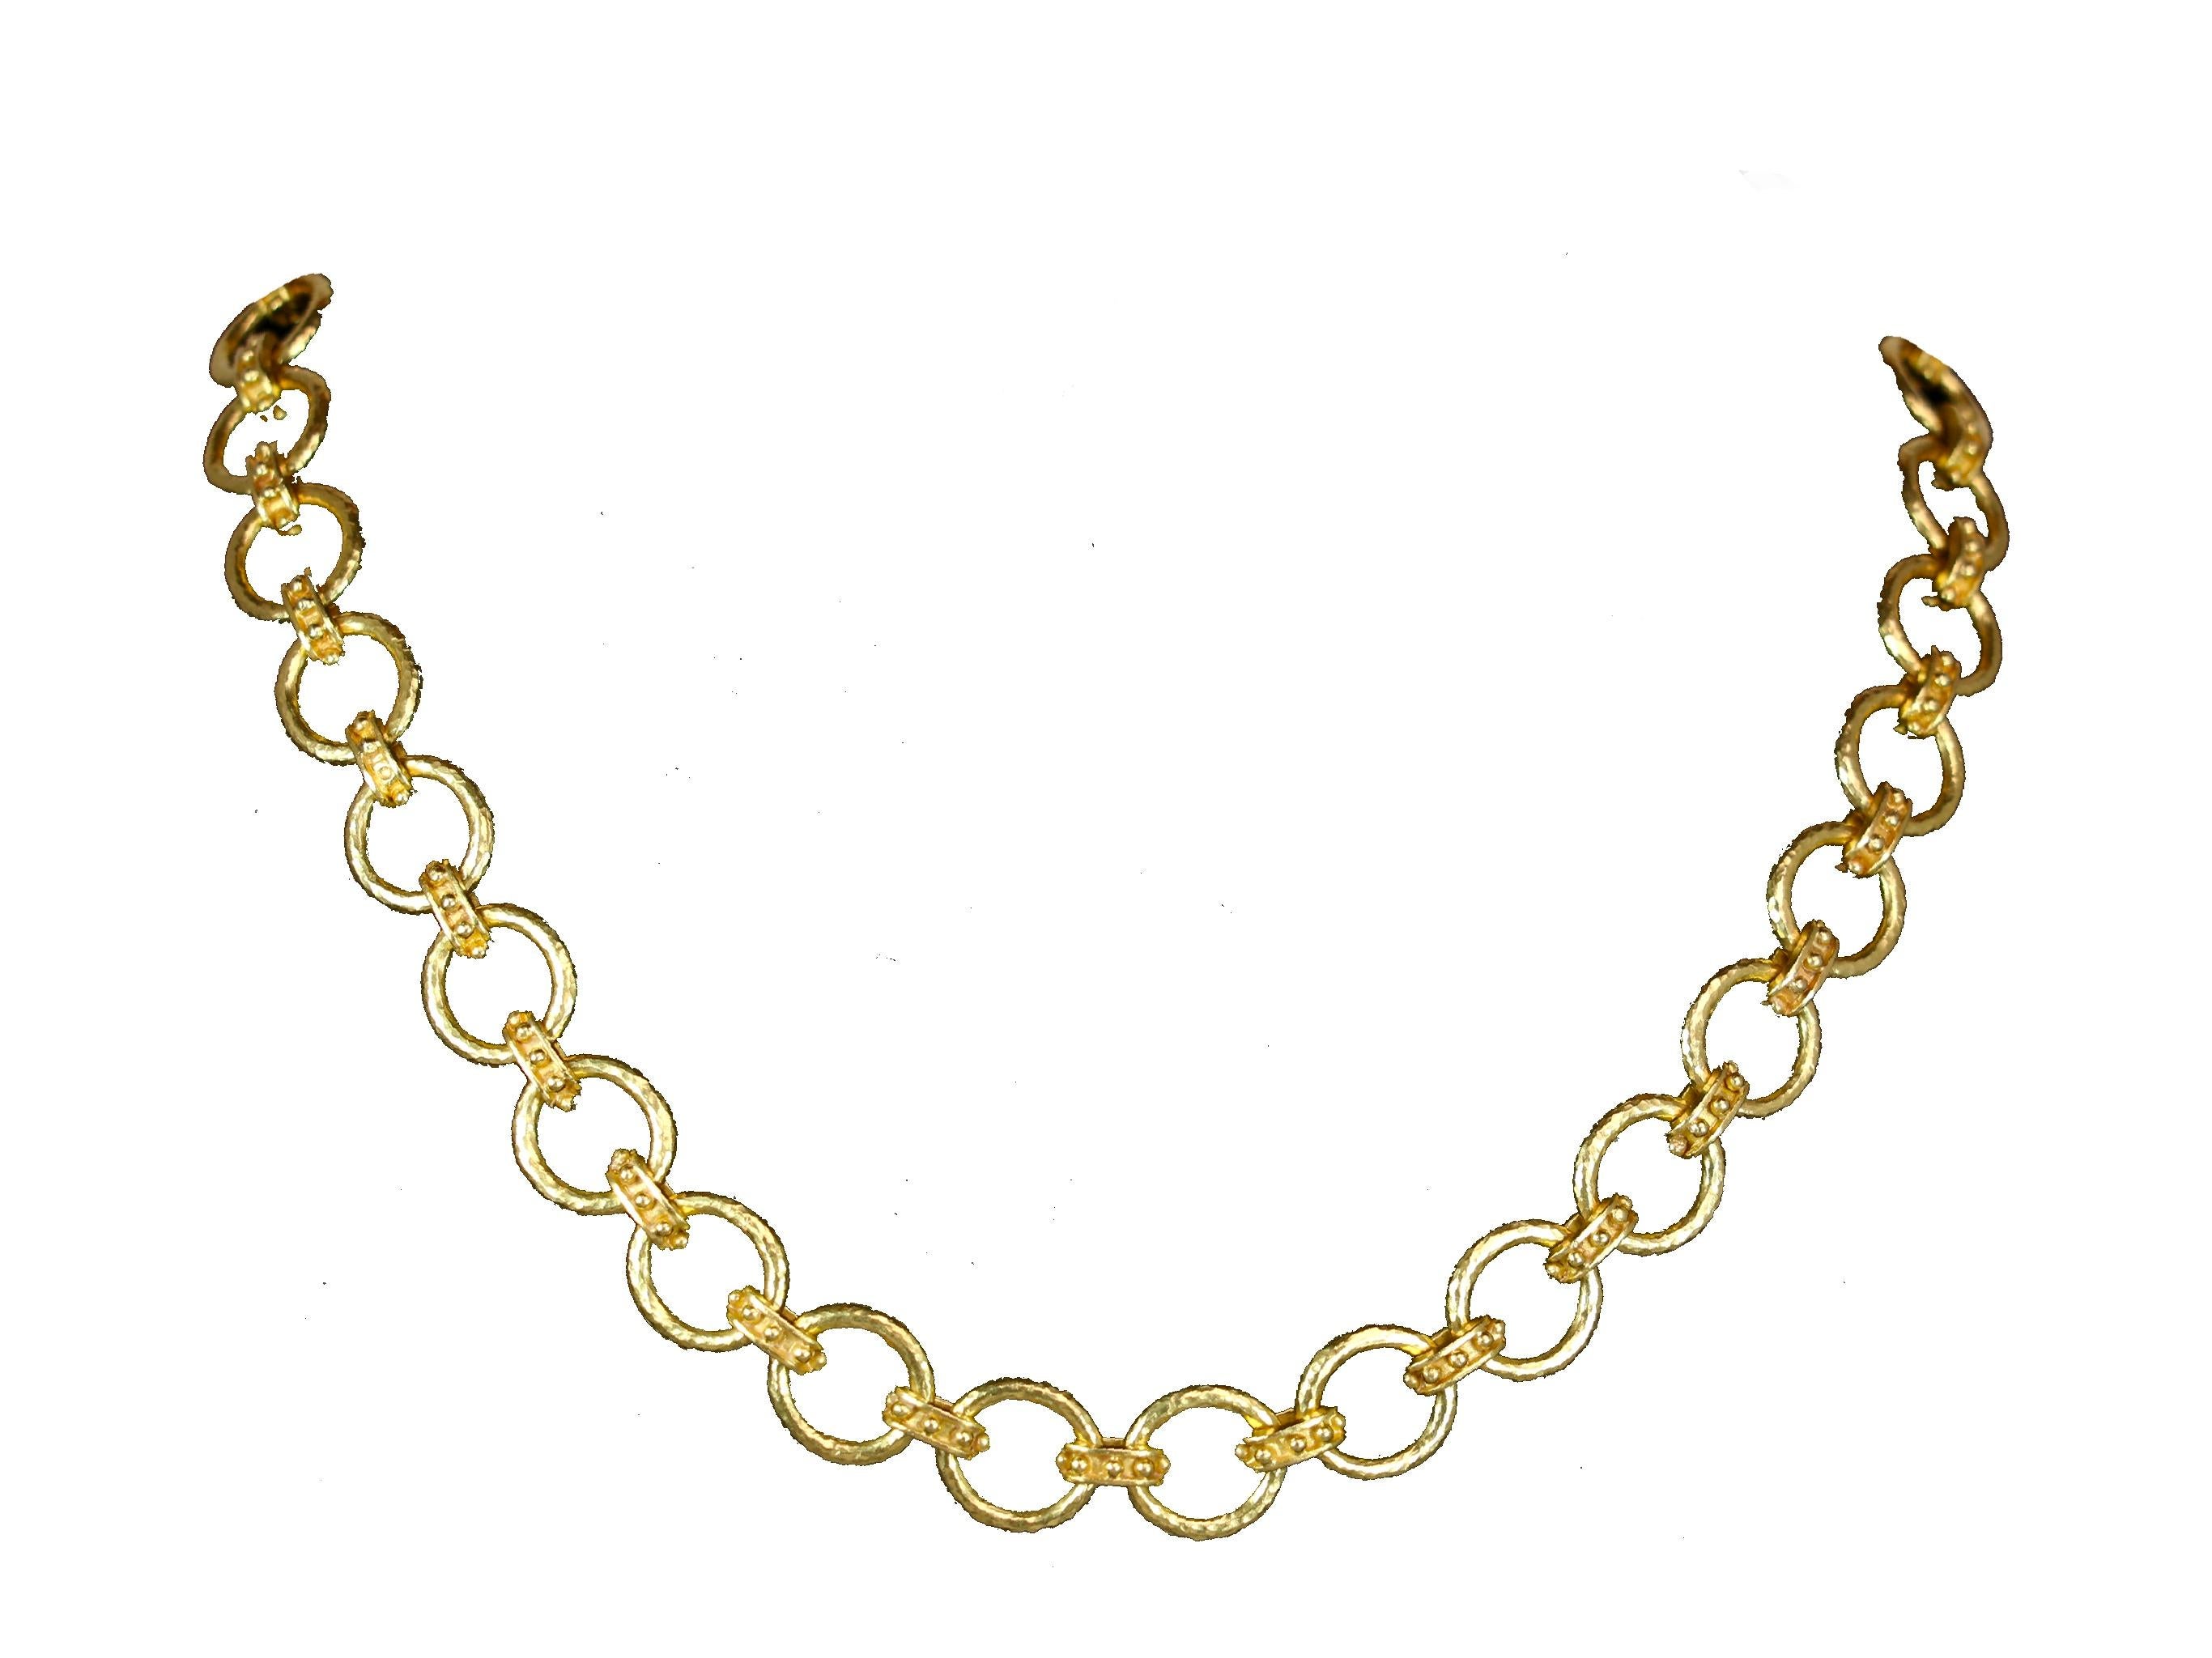 A stunning offering from Elizabeth Locke. This chain measures 17.5 inches and is made from 19k Yellow Gold.